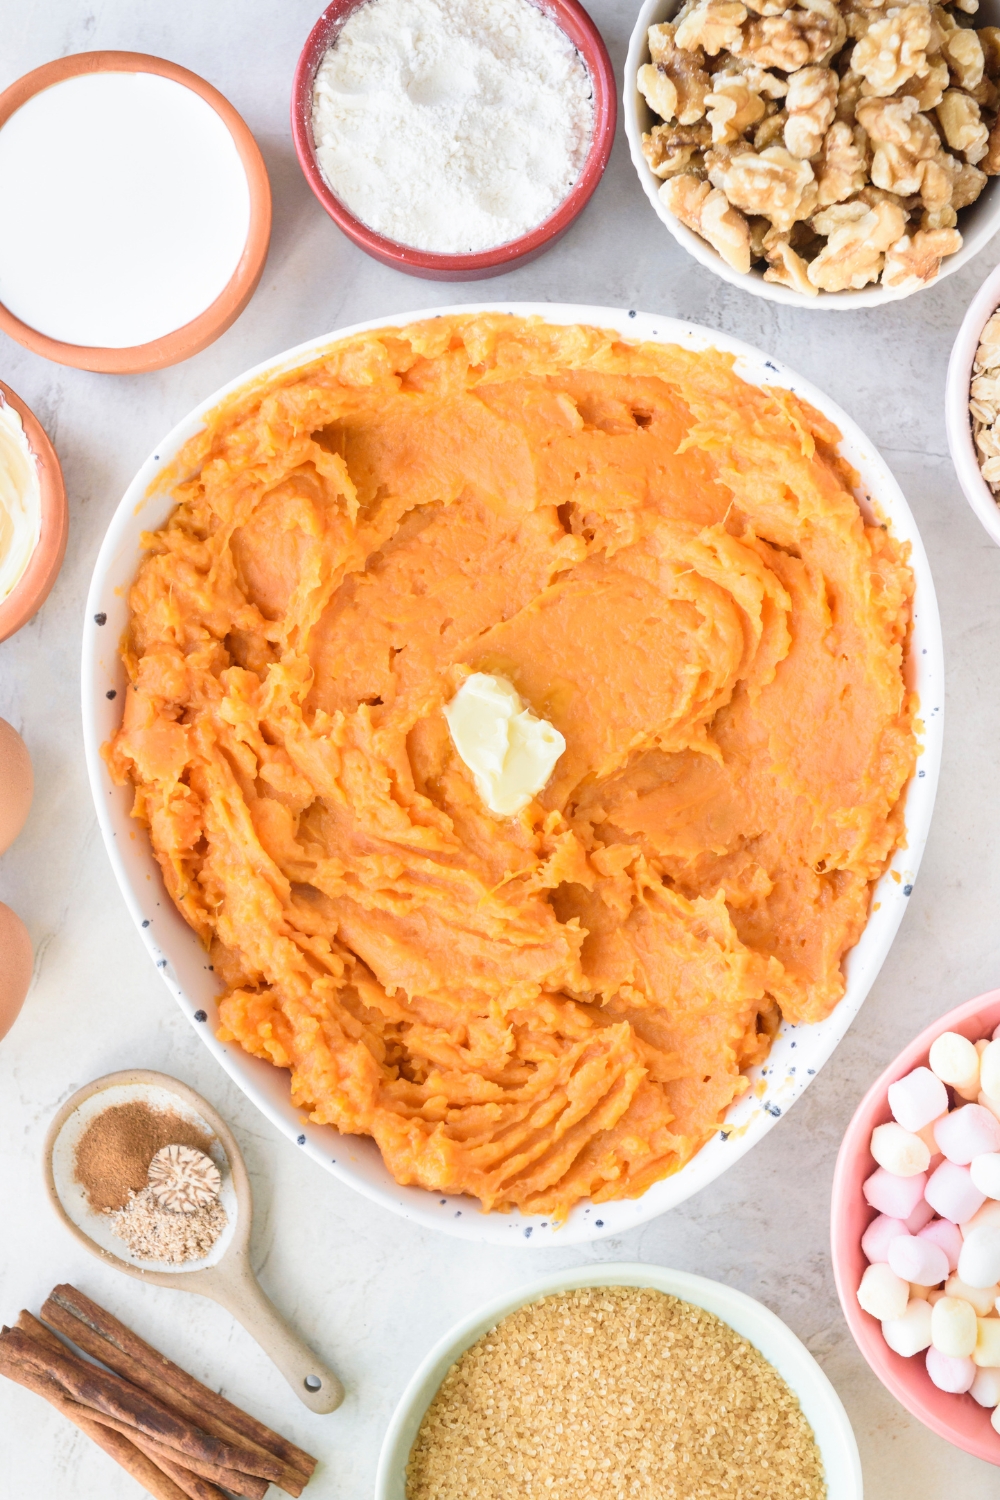 A large white bowl full of mashed sweet potatoes with a pat of butter in the middle. Bowls full of walnuts, marshmallows, brown sugar, spices, flour, and cream surround the large bowl